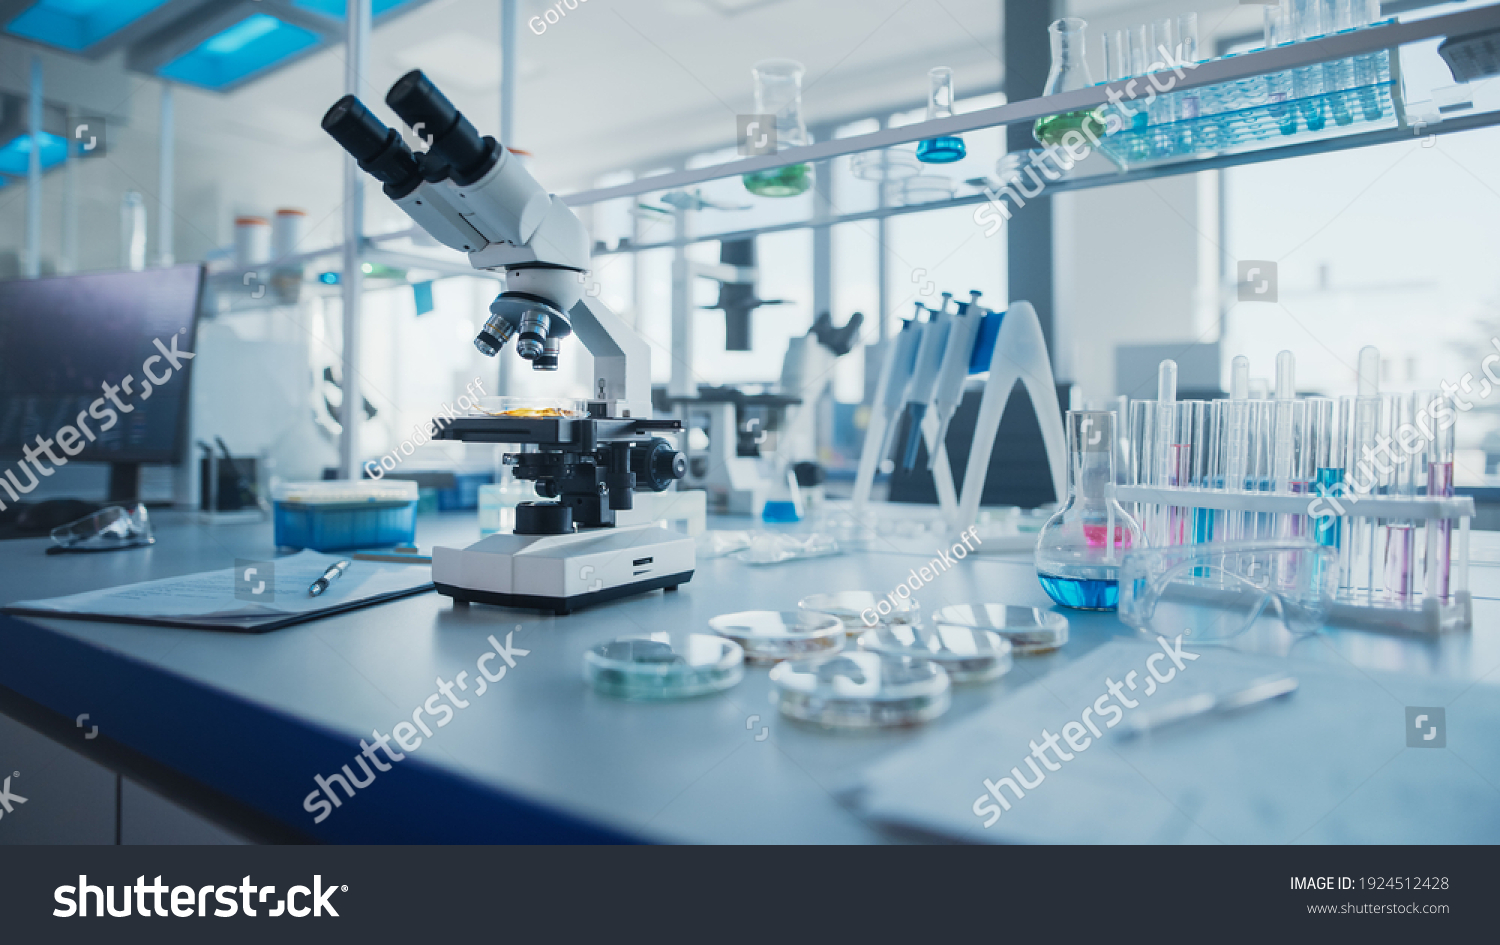 Modern Medical Research Laboratory with Microscope and Test Tubes with Biochemicals on the Desk. Scientific Lab Biotechnology Development Center of High-Tech Equipment, Technology. #1924512428